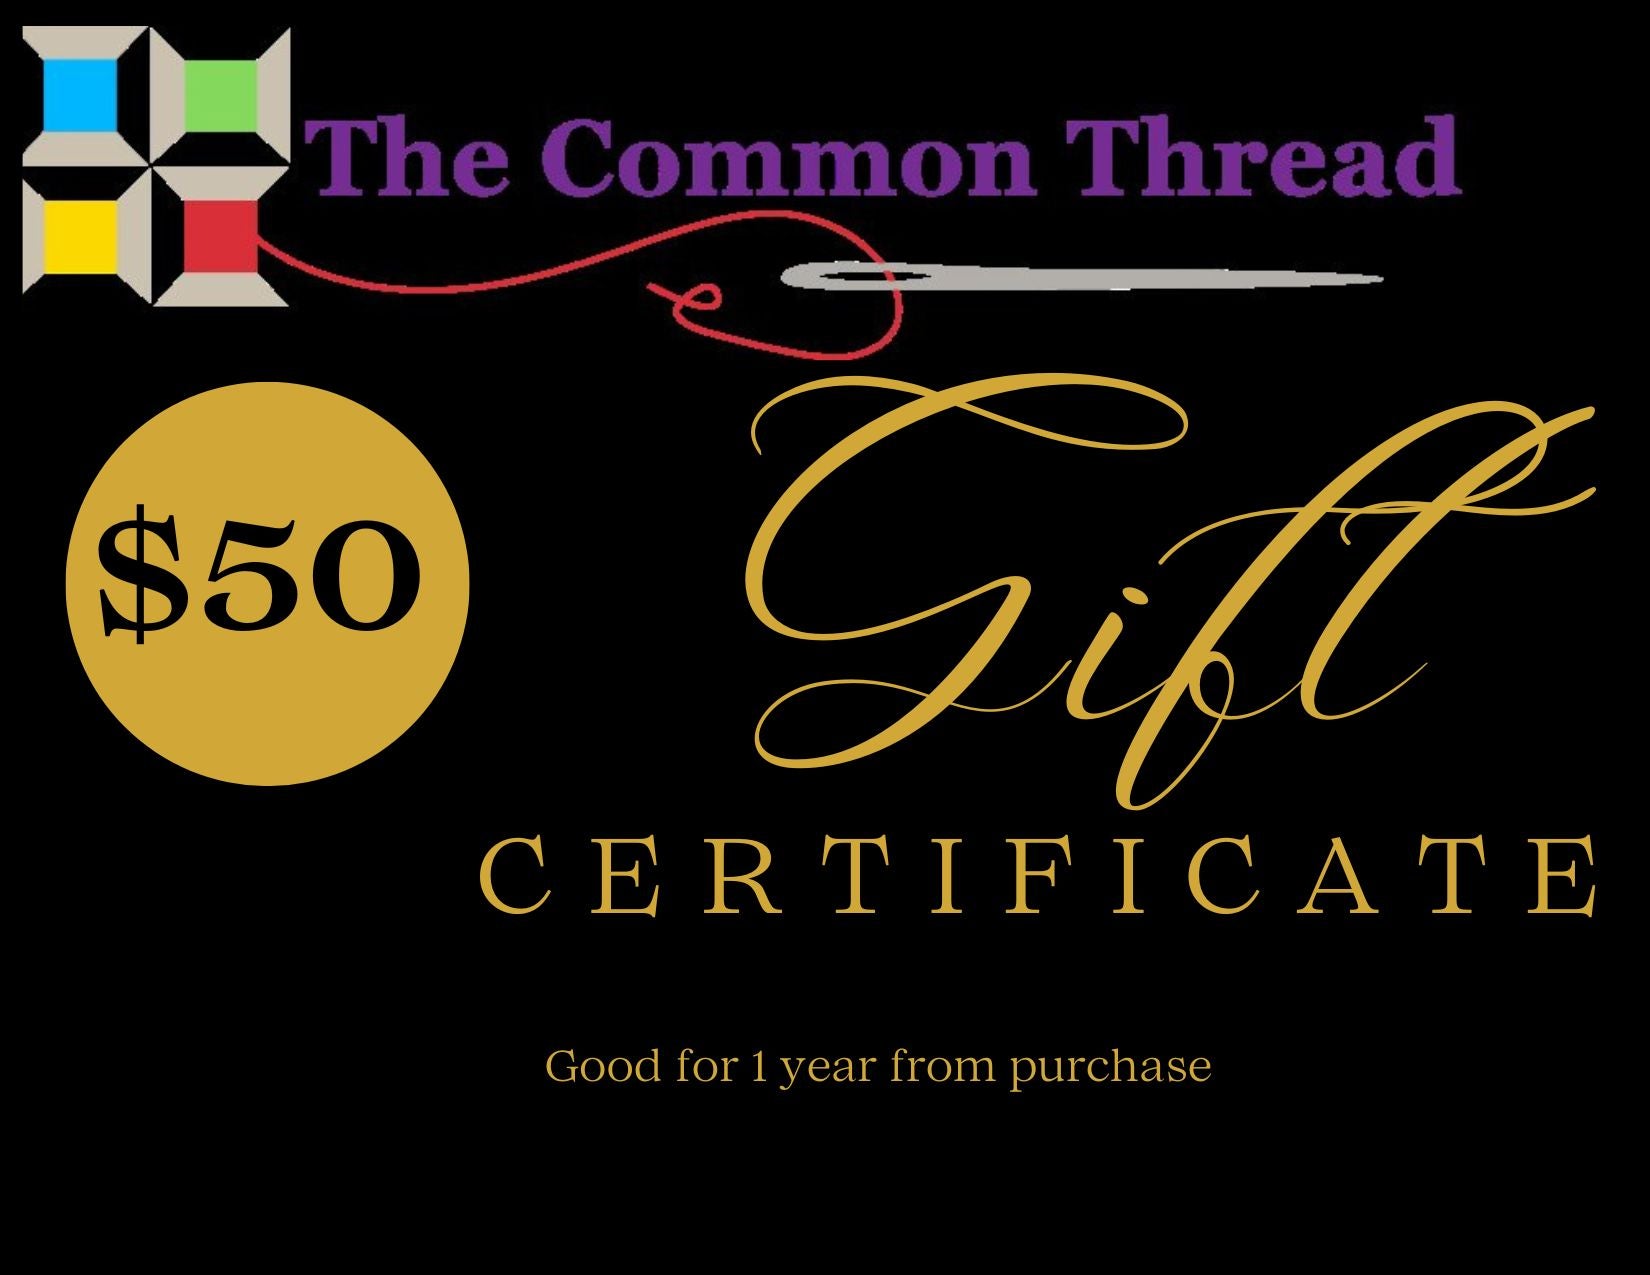 $50 GIFT CERTIFICATE FOR IN STORE USE ONLY